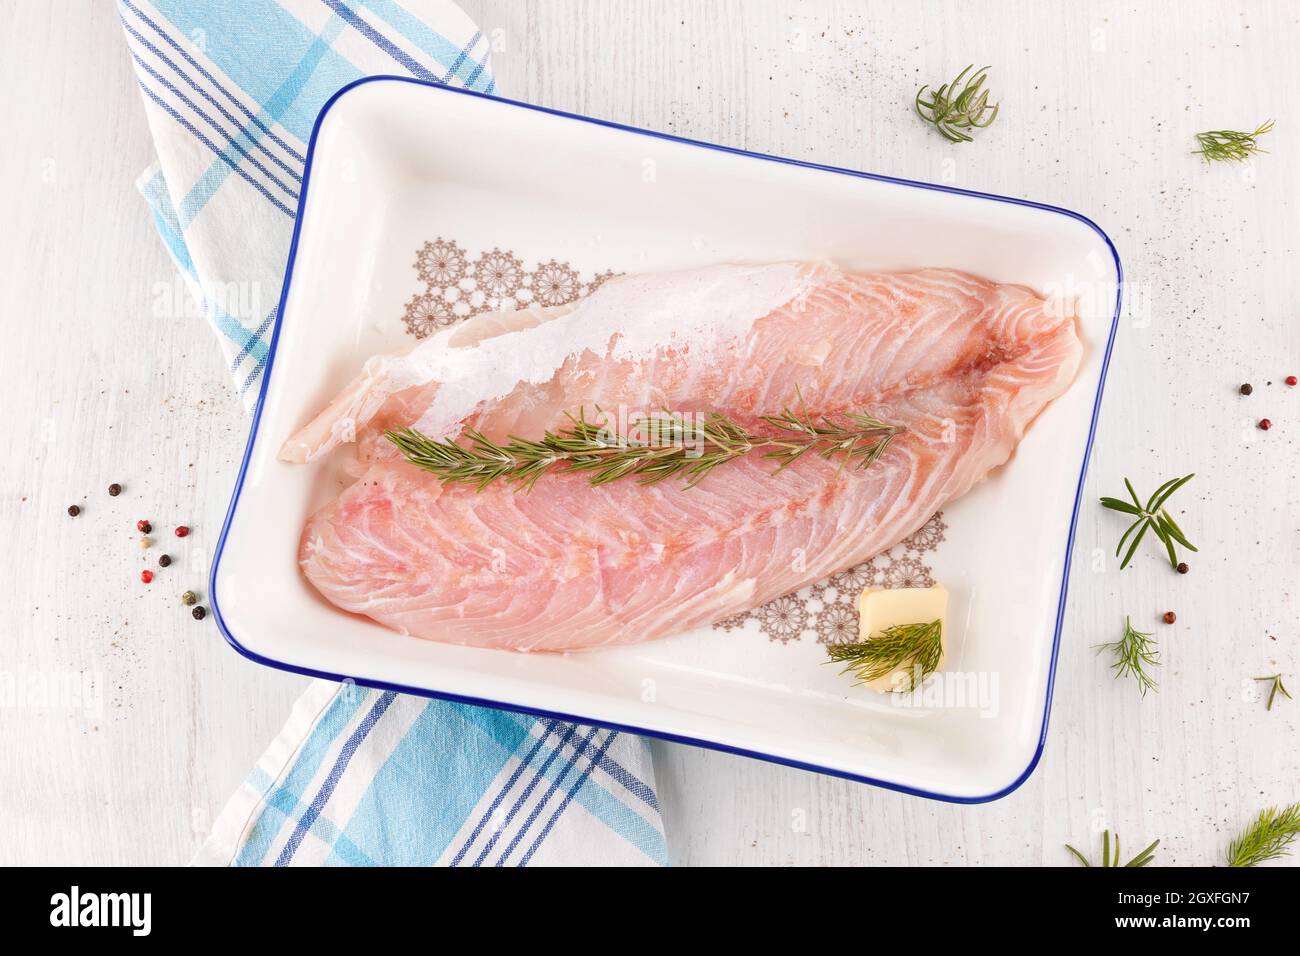 Delicious fresh fish fillet. Luxurious seafood eating. Stock Photo